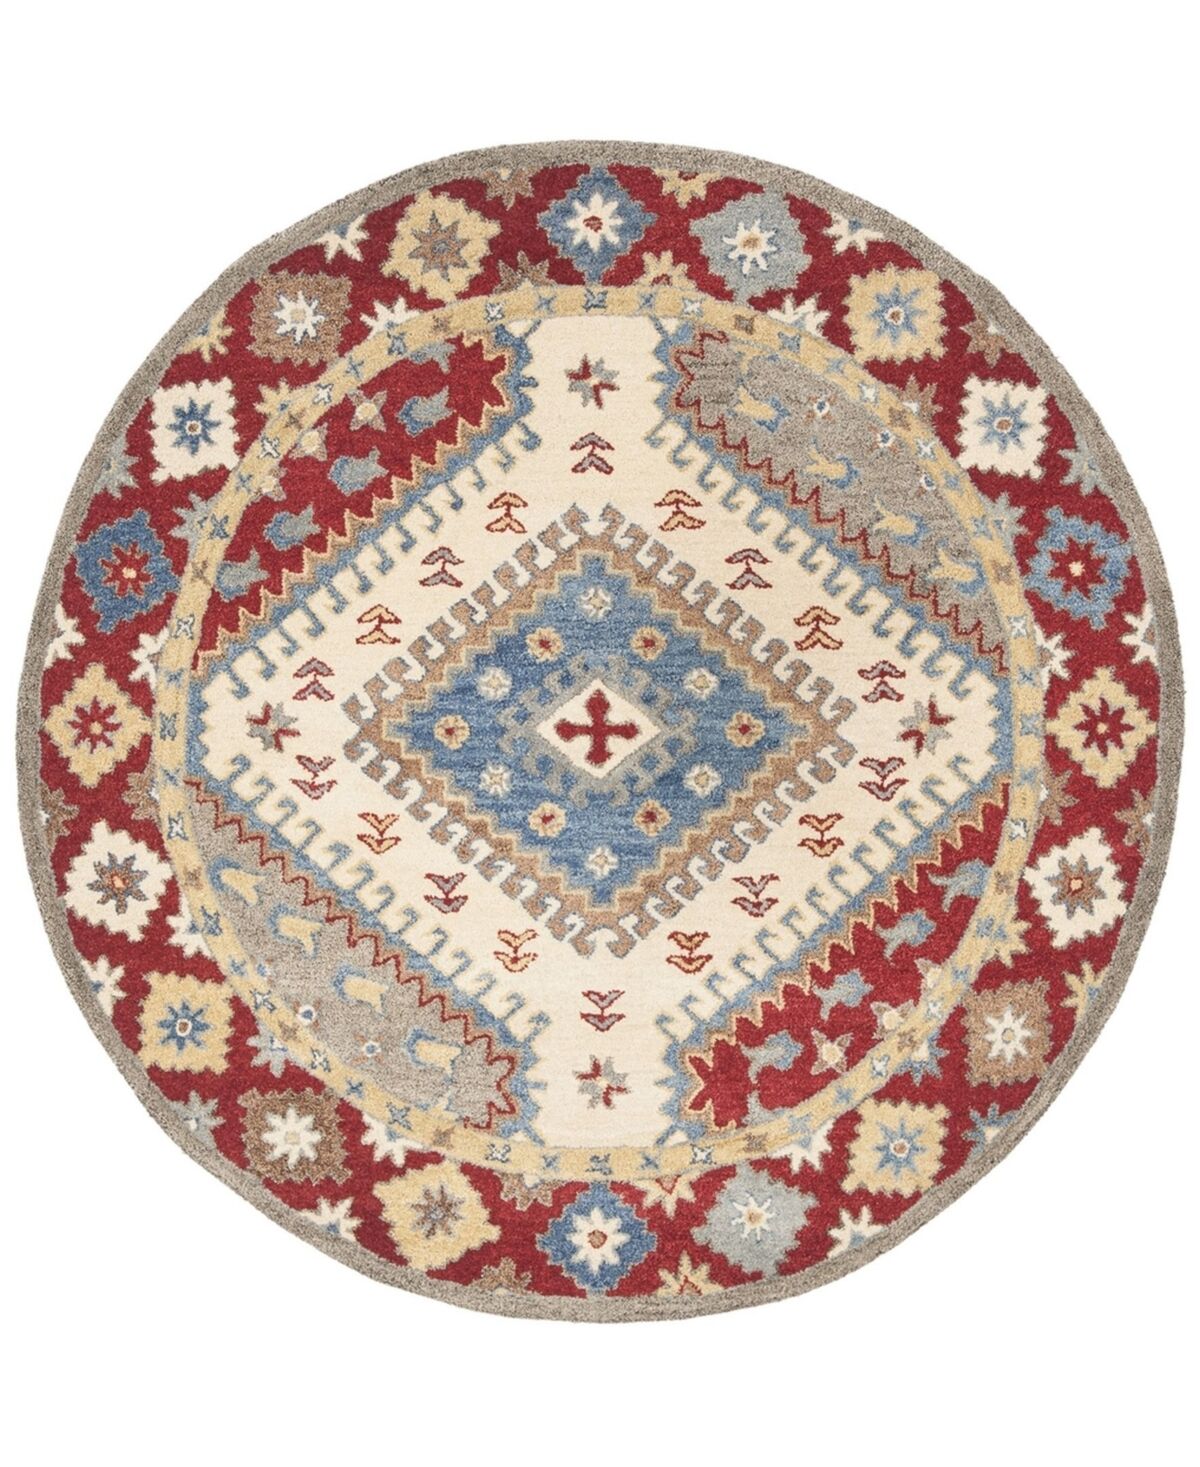 Safavieh Antiquity At507 Red and Ivory 6' x 6' Round Area Rug - Red